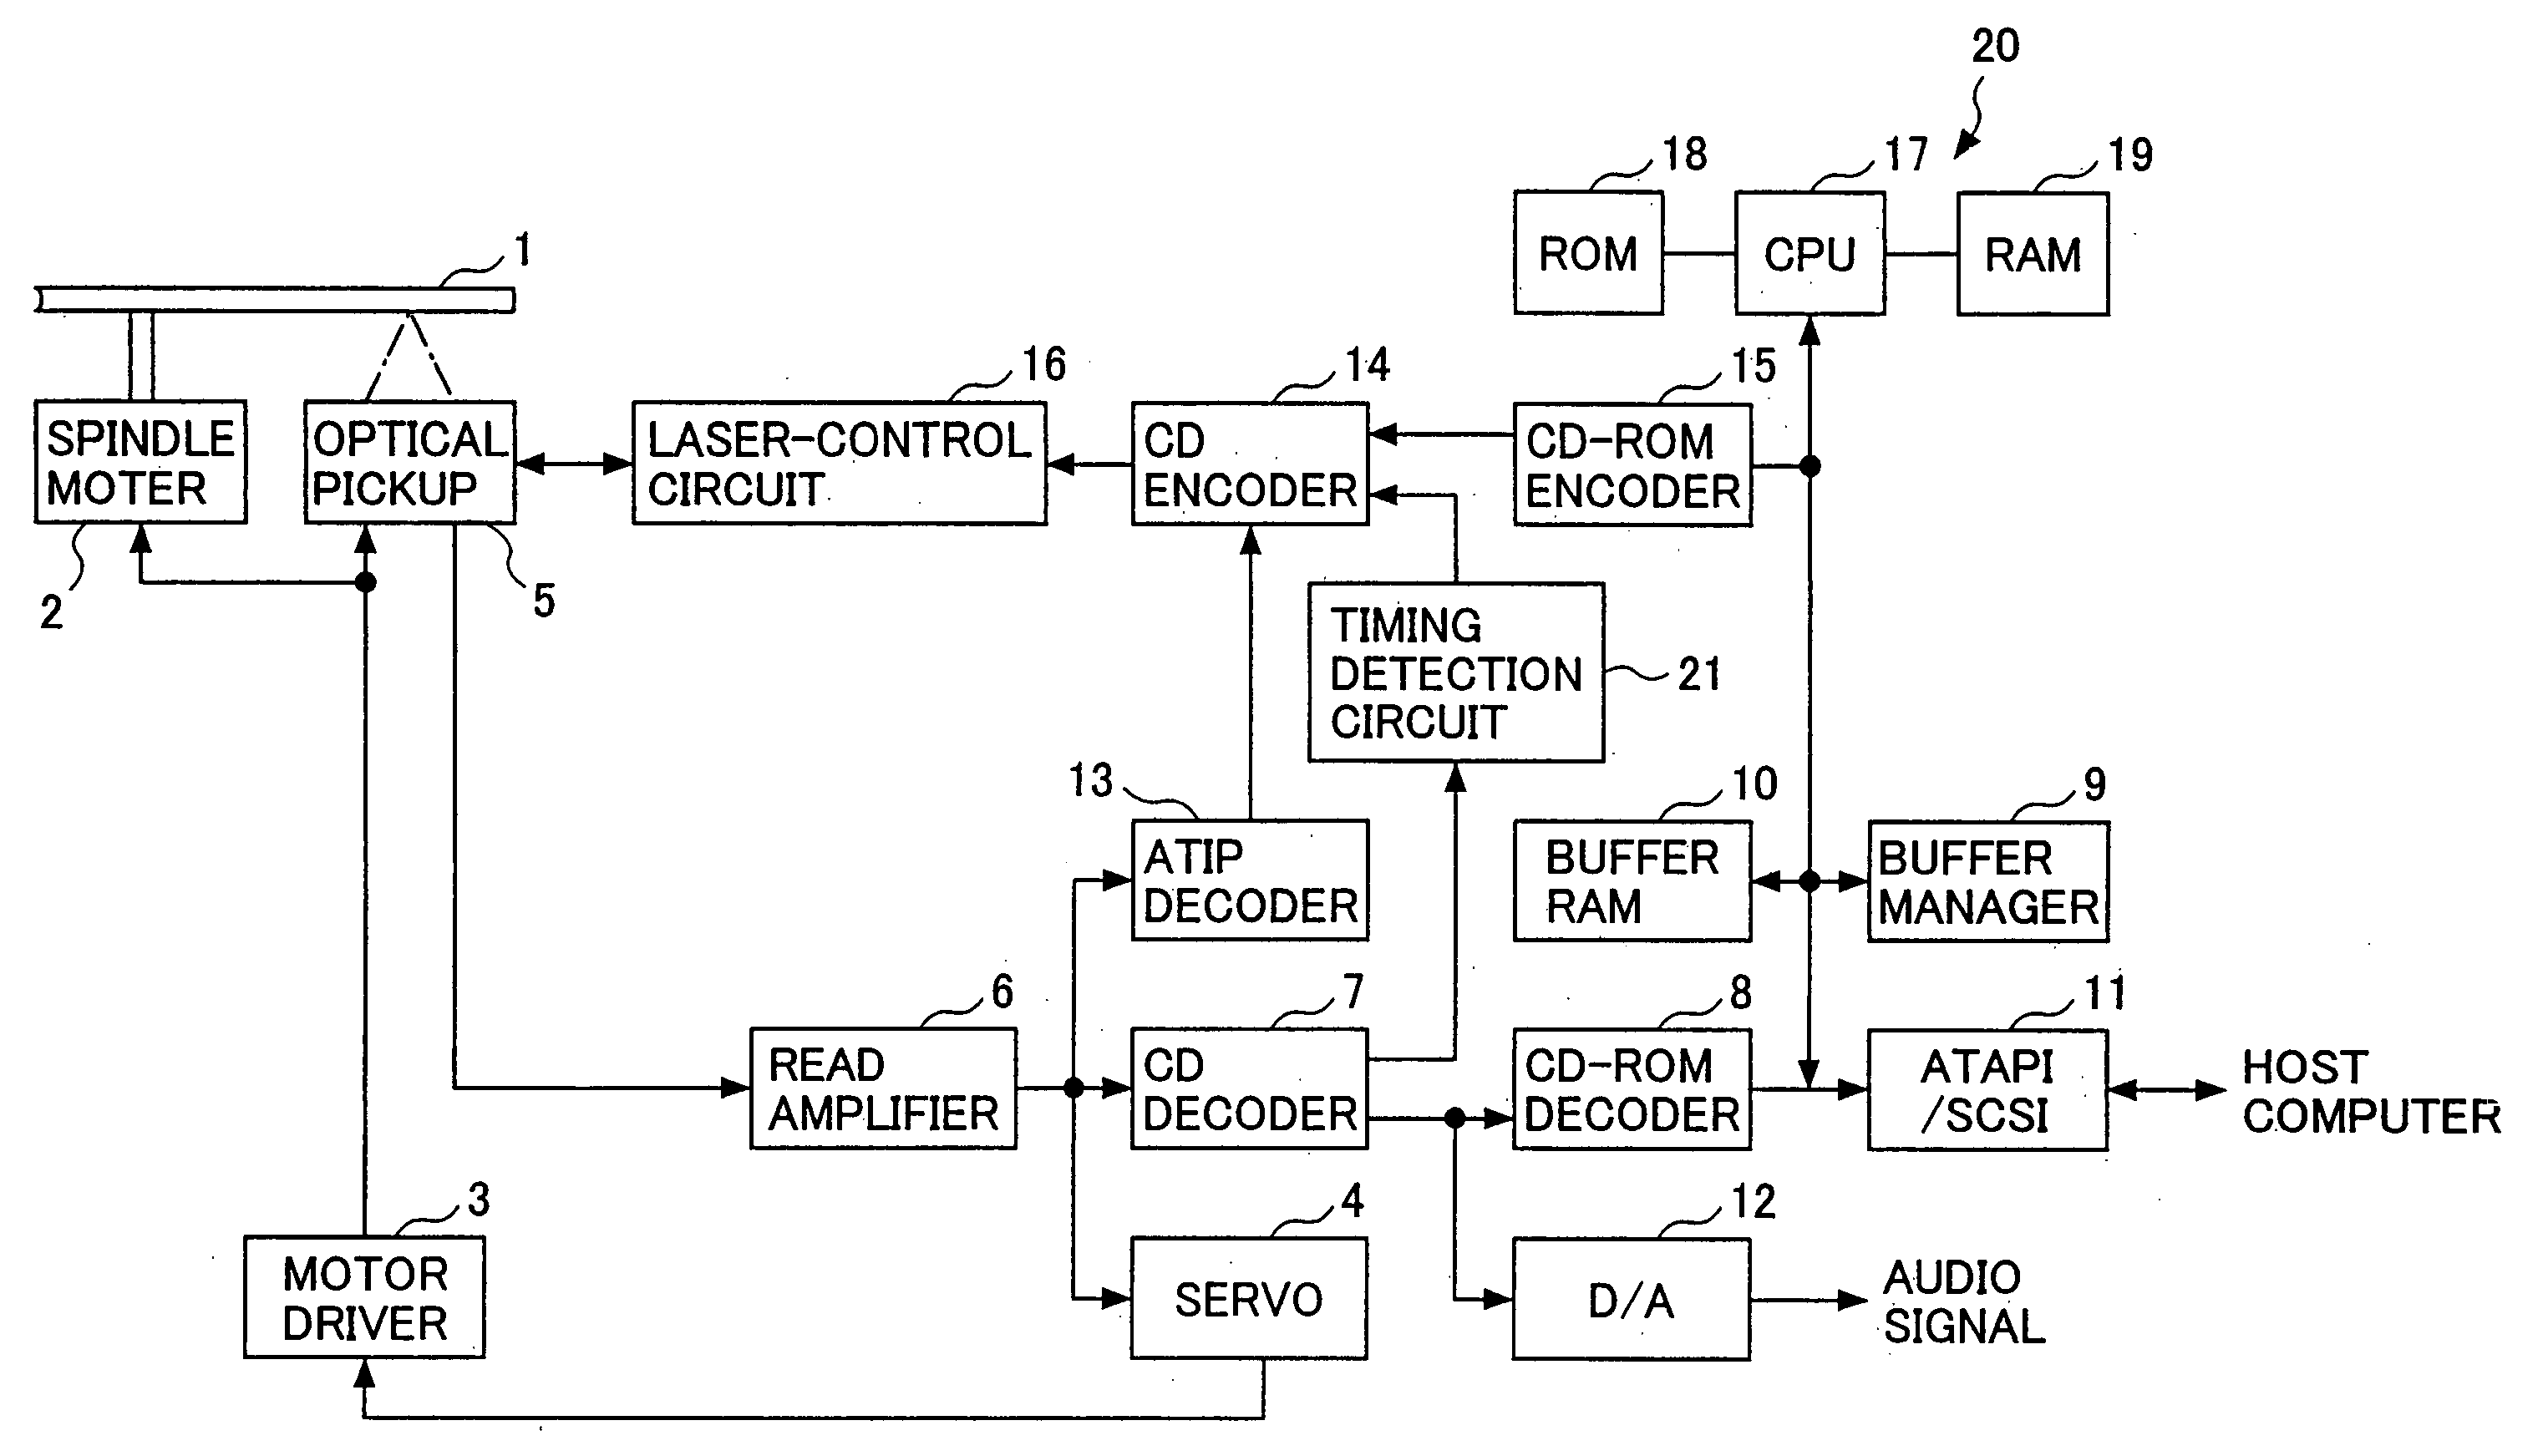 Optical disk device recording data on a recordable or rewritable optical disk by setting a recording velocity and a recording power for each of zones on an optical disk